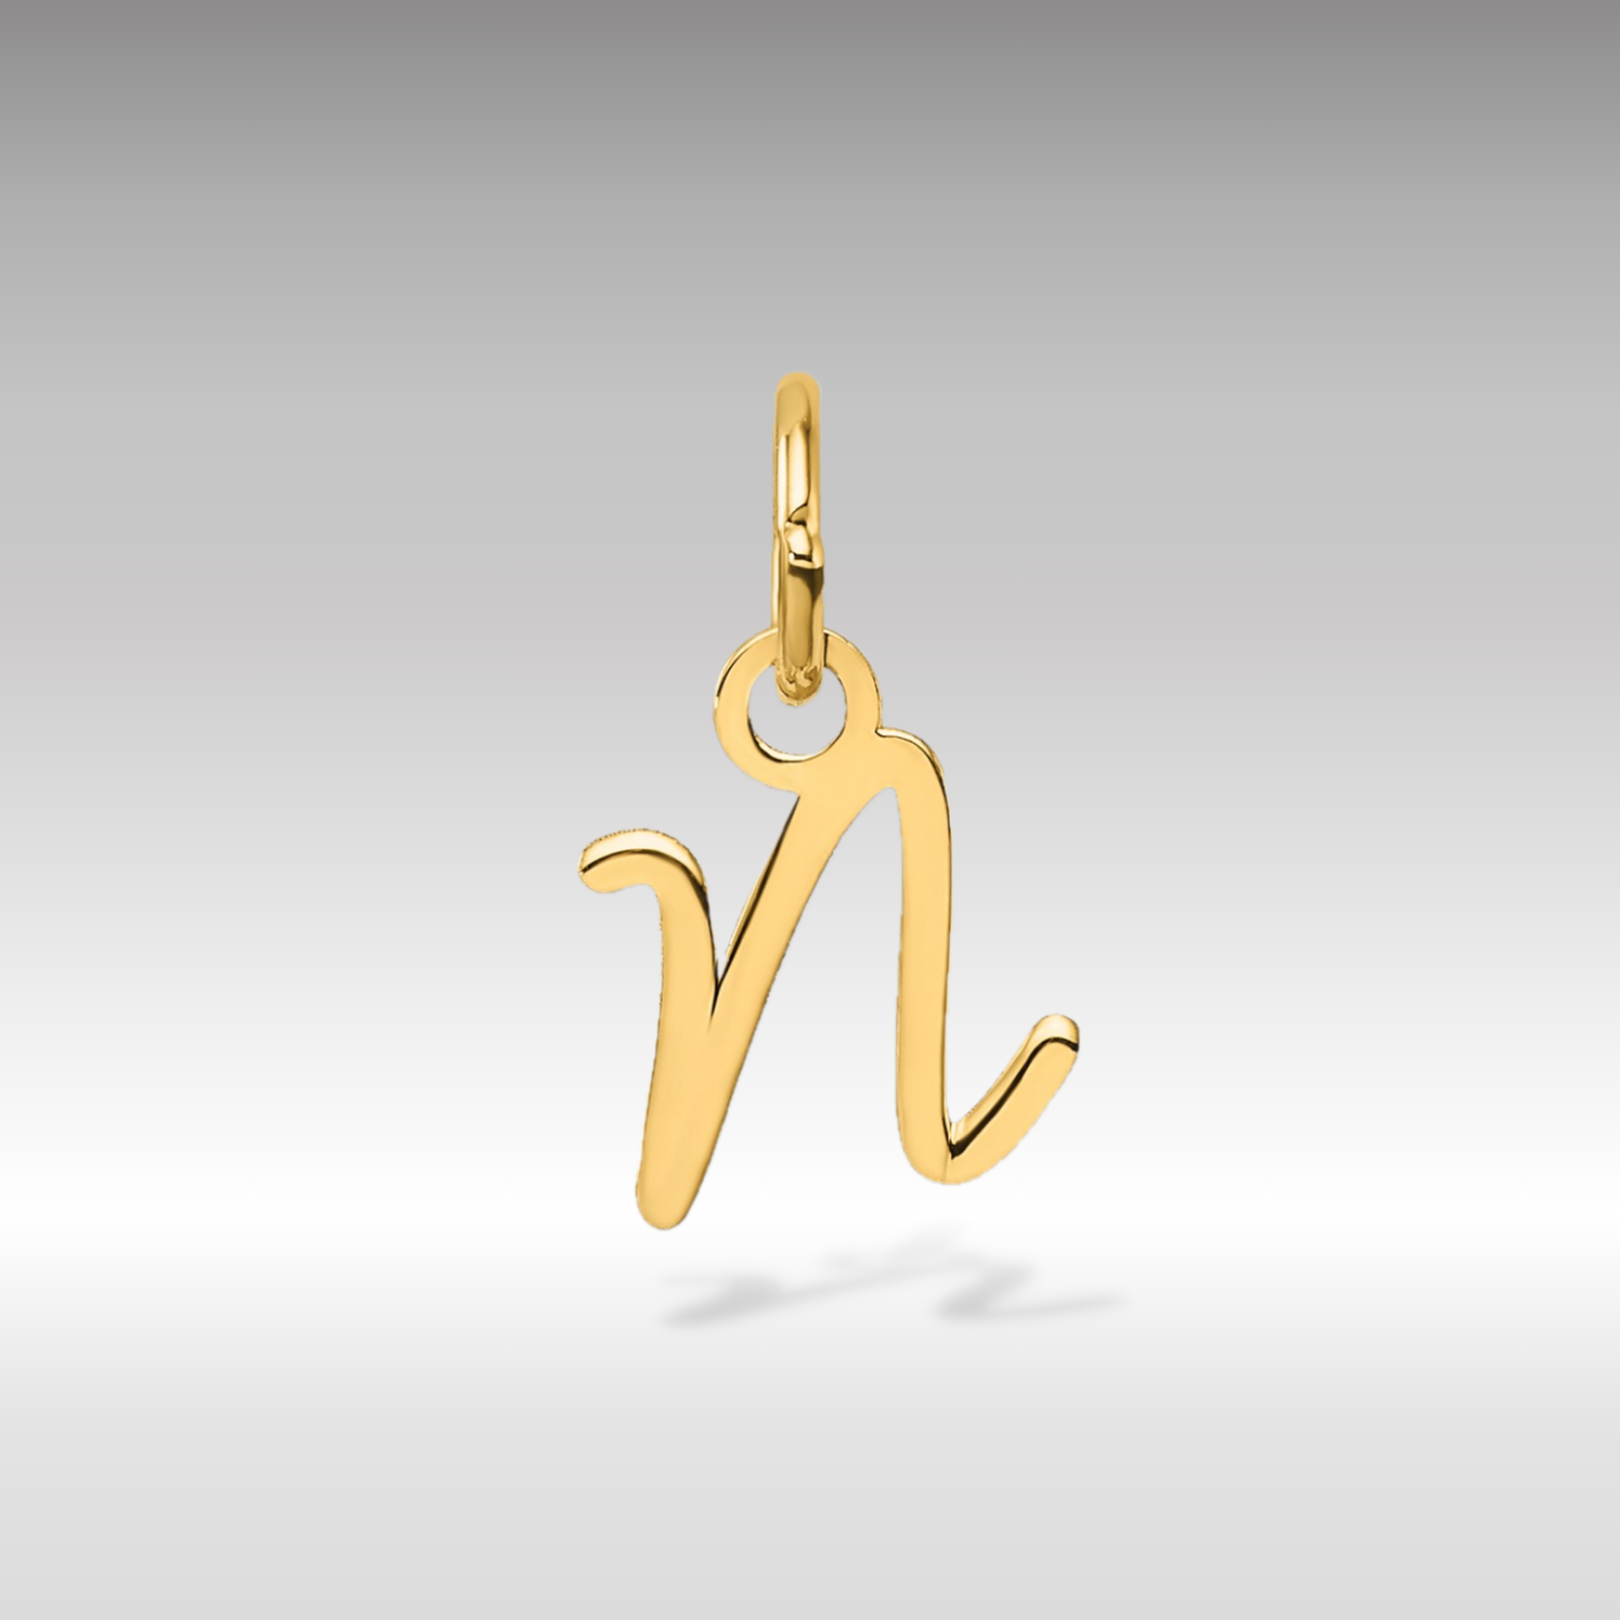 14K Gold Small Script Letter "N" Initial Pendant - Charlie & Co. Jewelry